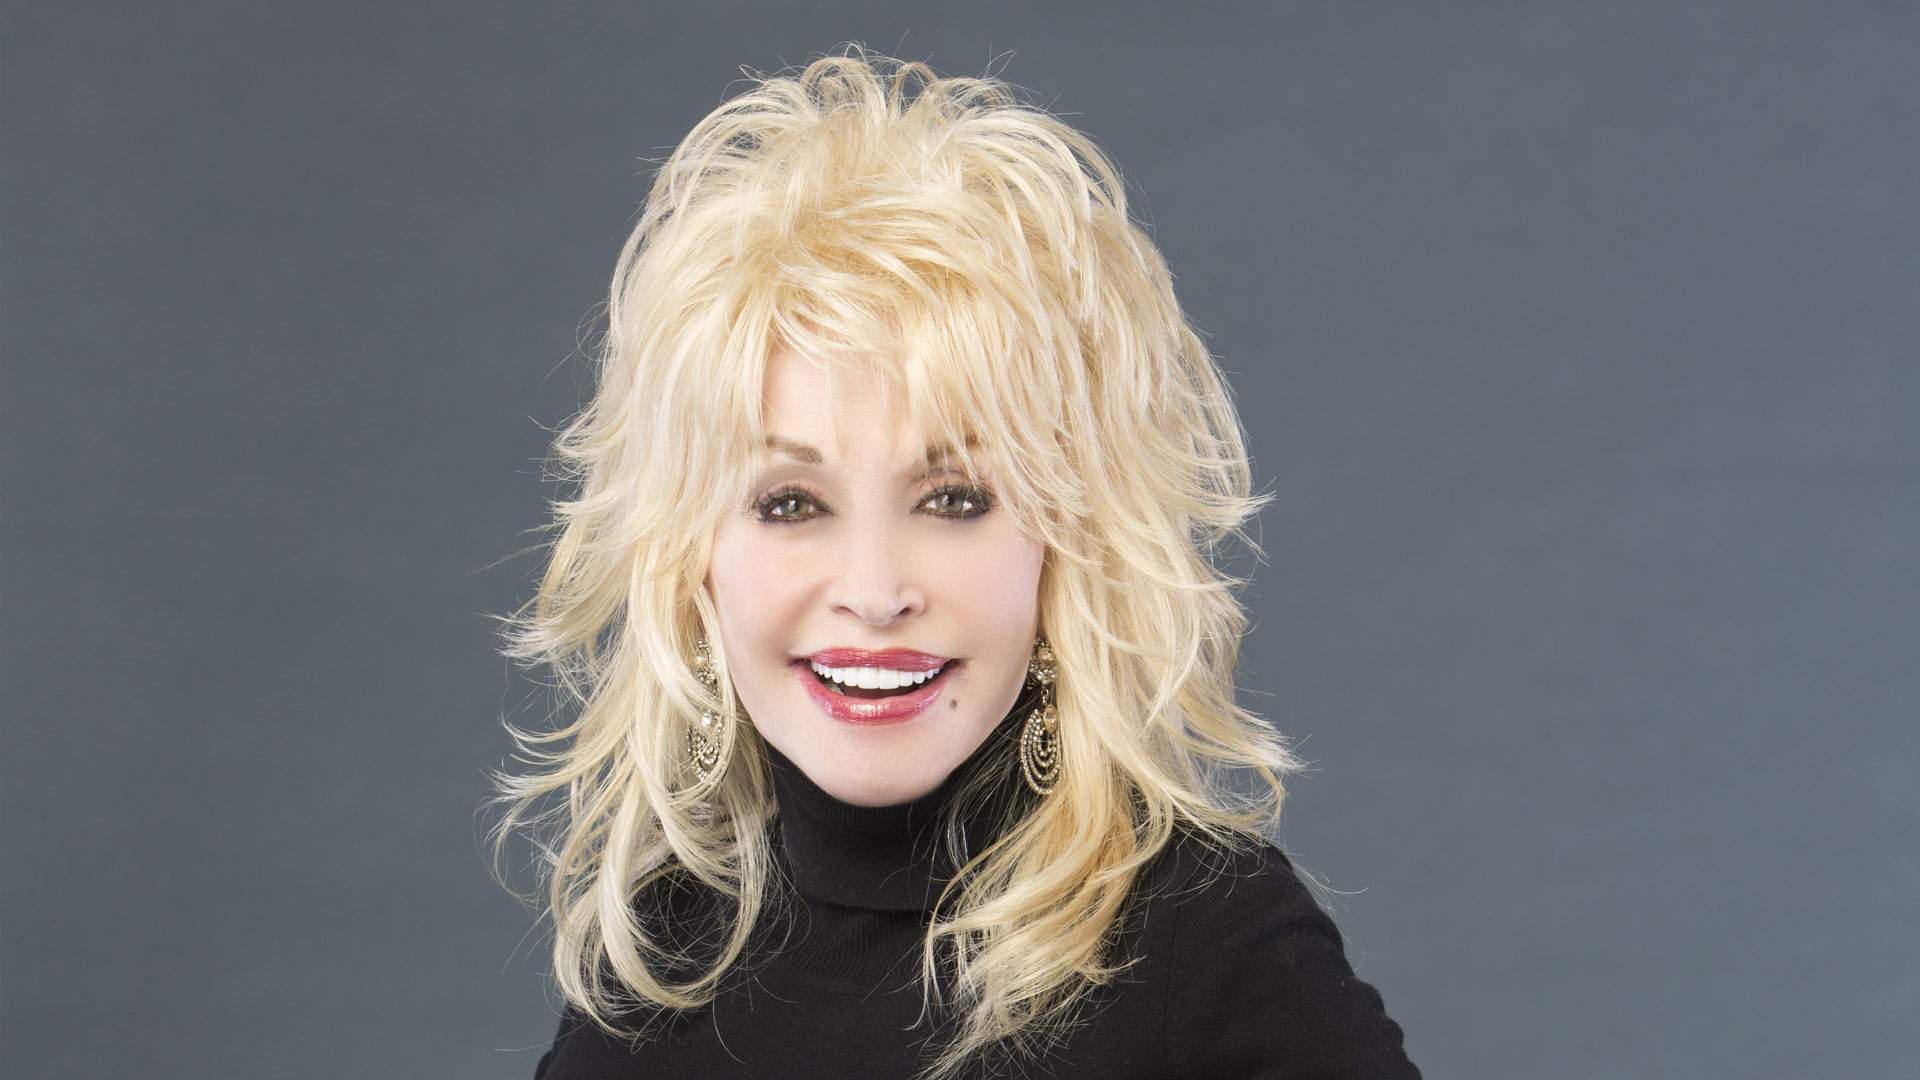 Dolly Parton Has Announced a Broadway Musical Based on Her Life So Start Begging for It to Please Come Down Under